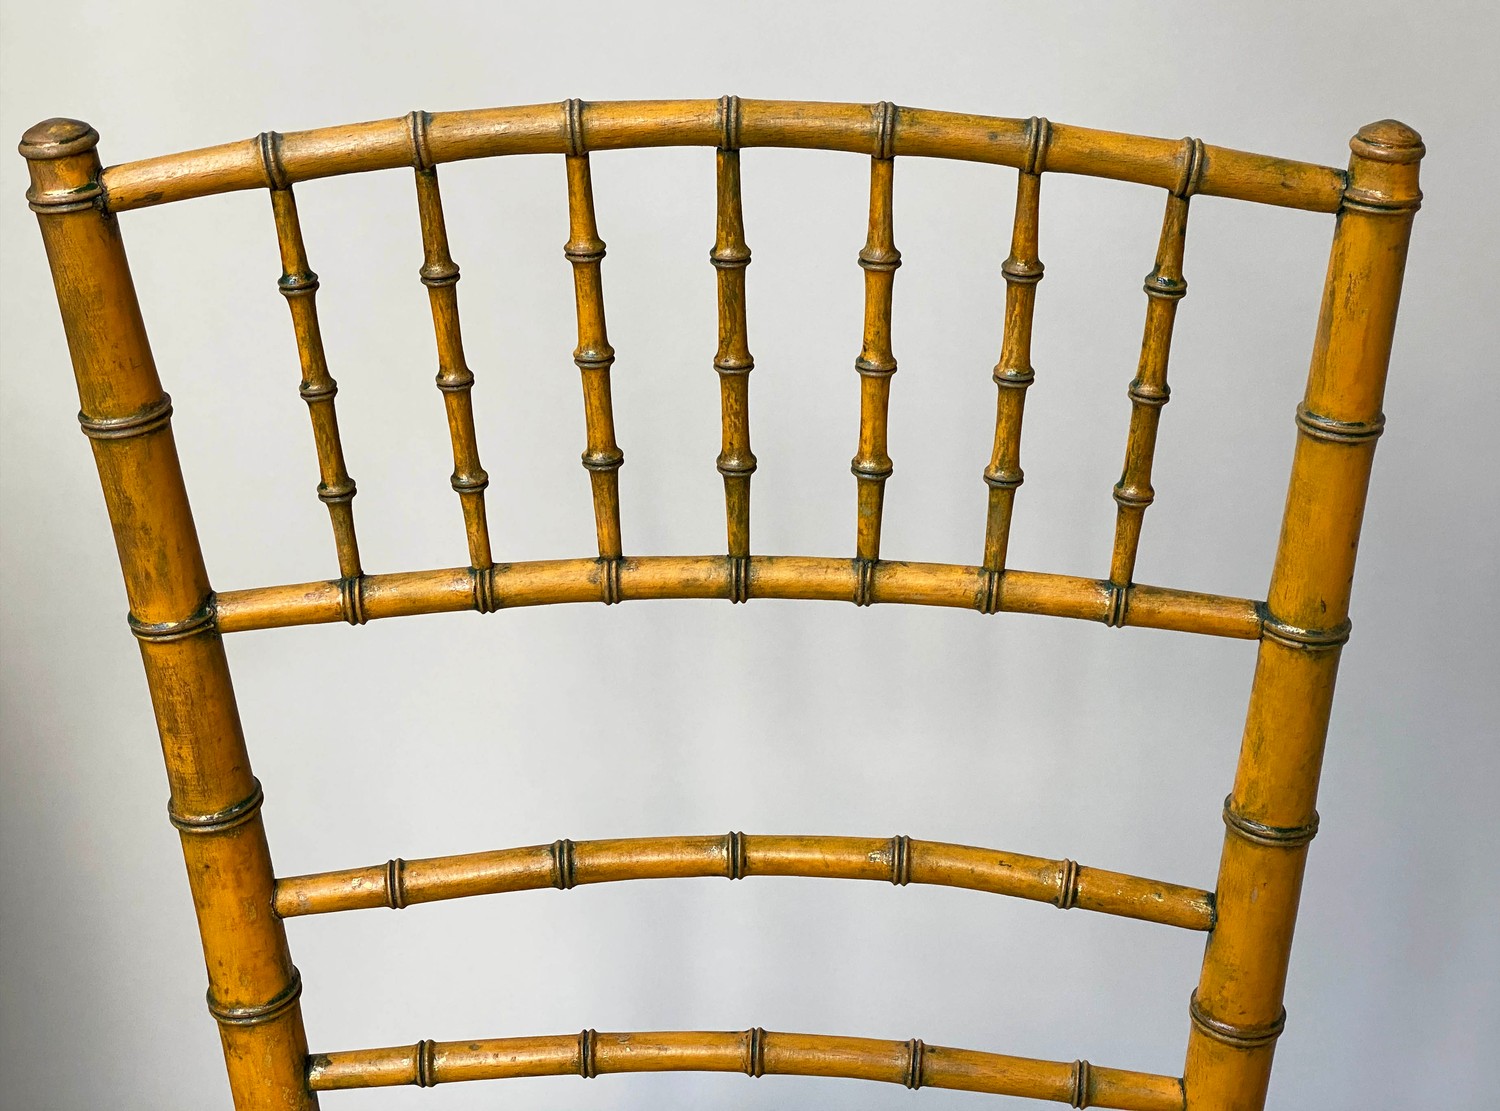 SALON CHAIRS, a pair, 19th century faux bamboo framed with button yellow satin seats. (2) - Image 2 of 8